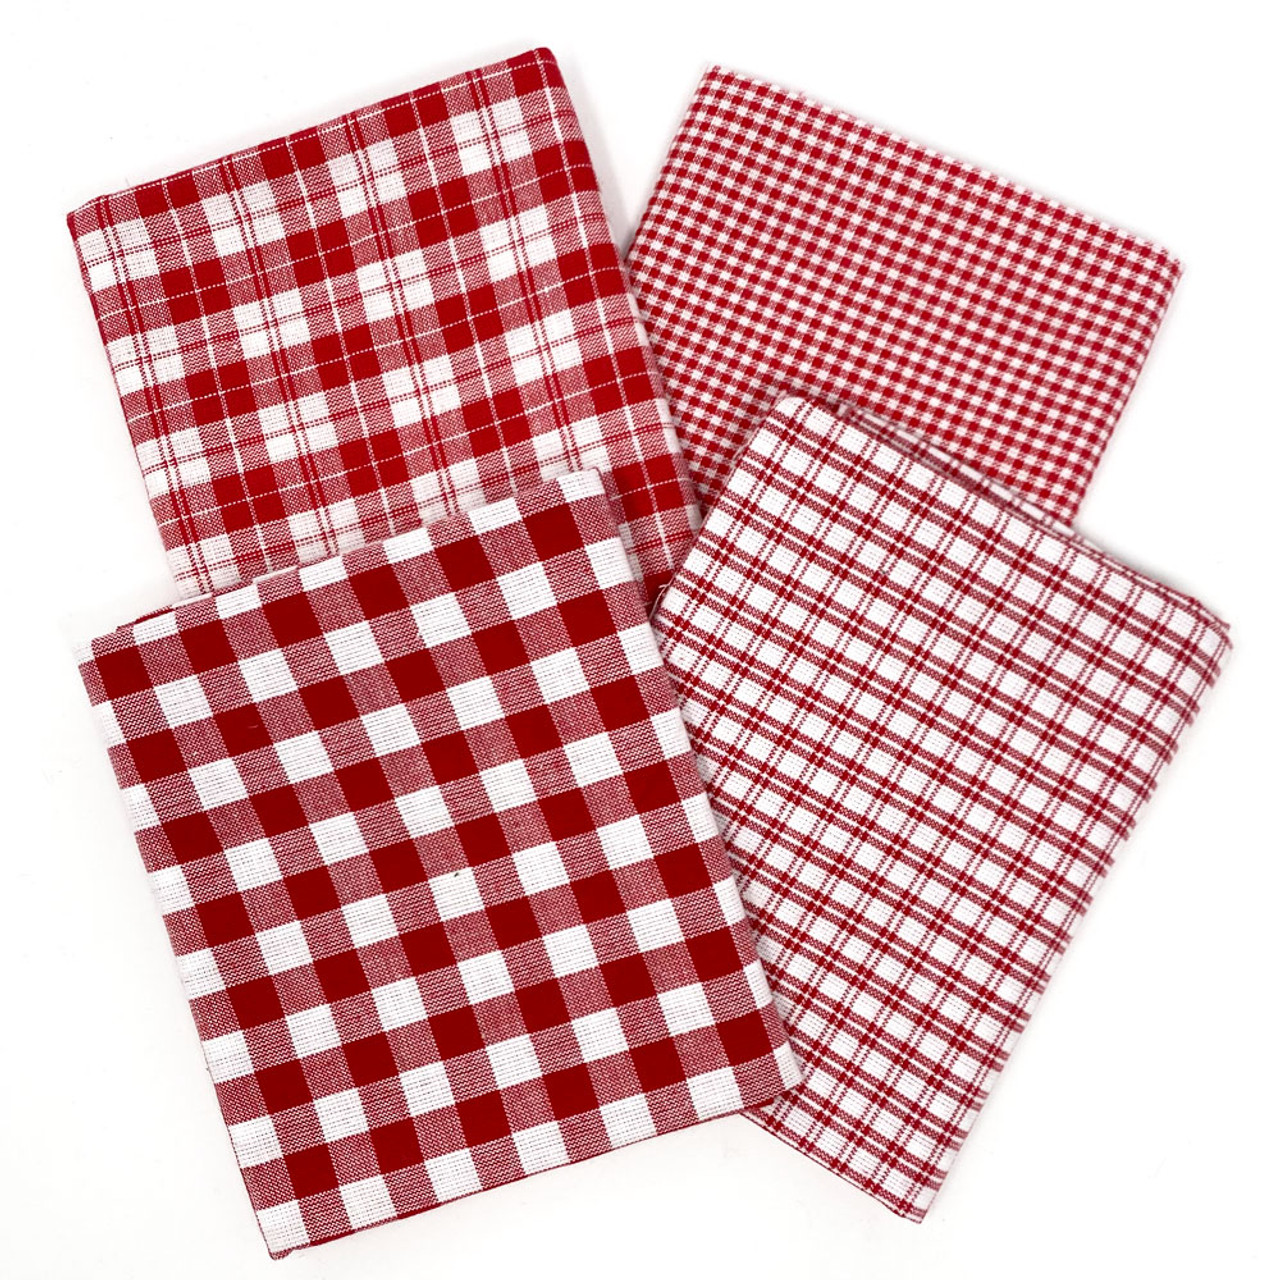 Perfect Red & White Assorted Plaid Bundle - Set of 4 Fat Quarters